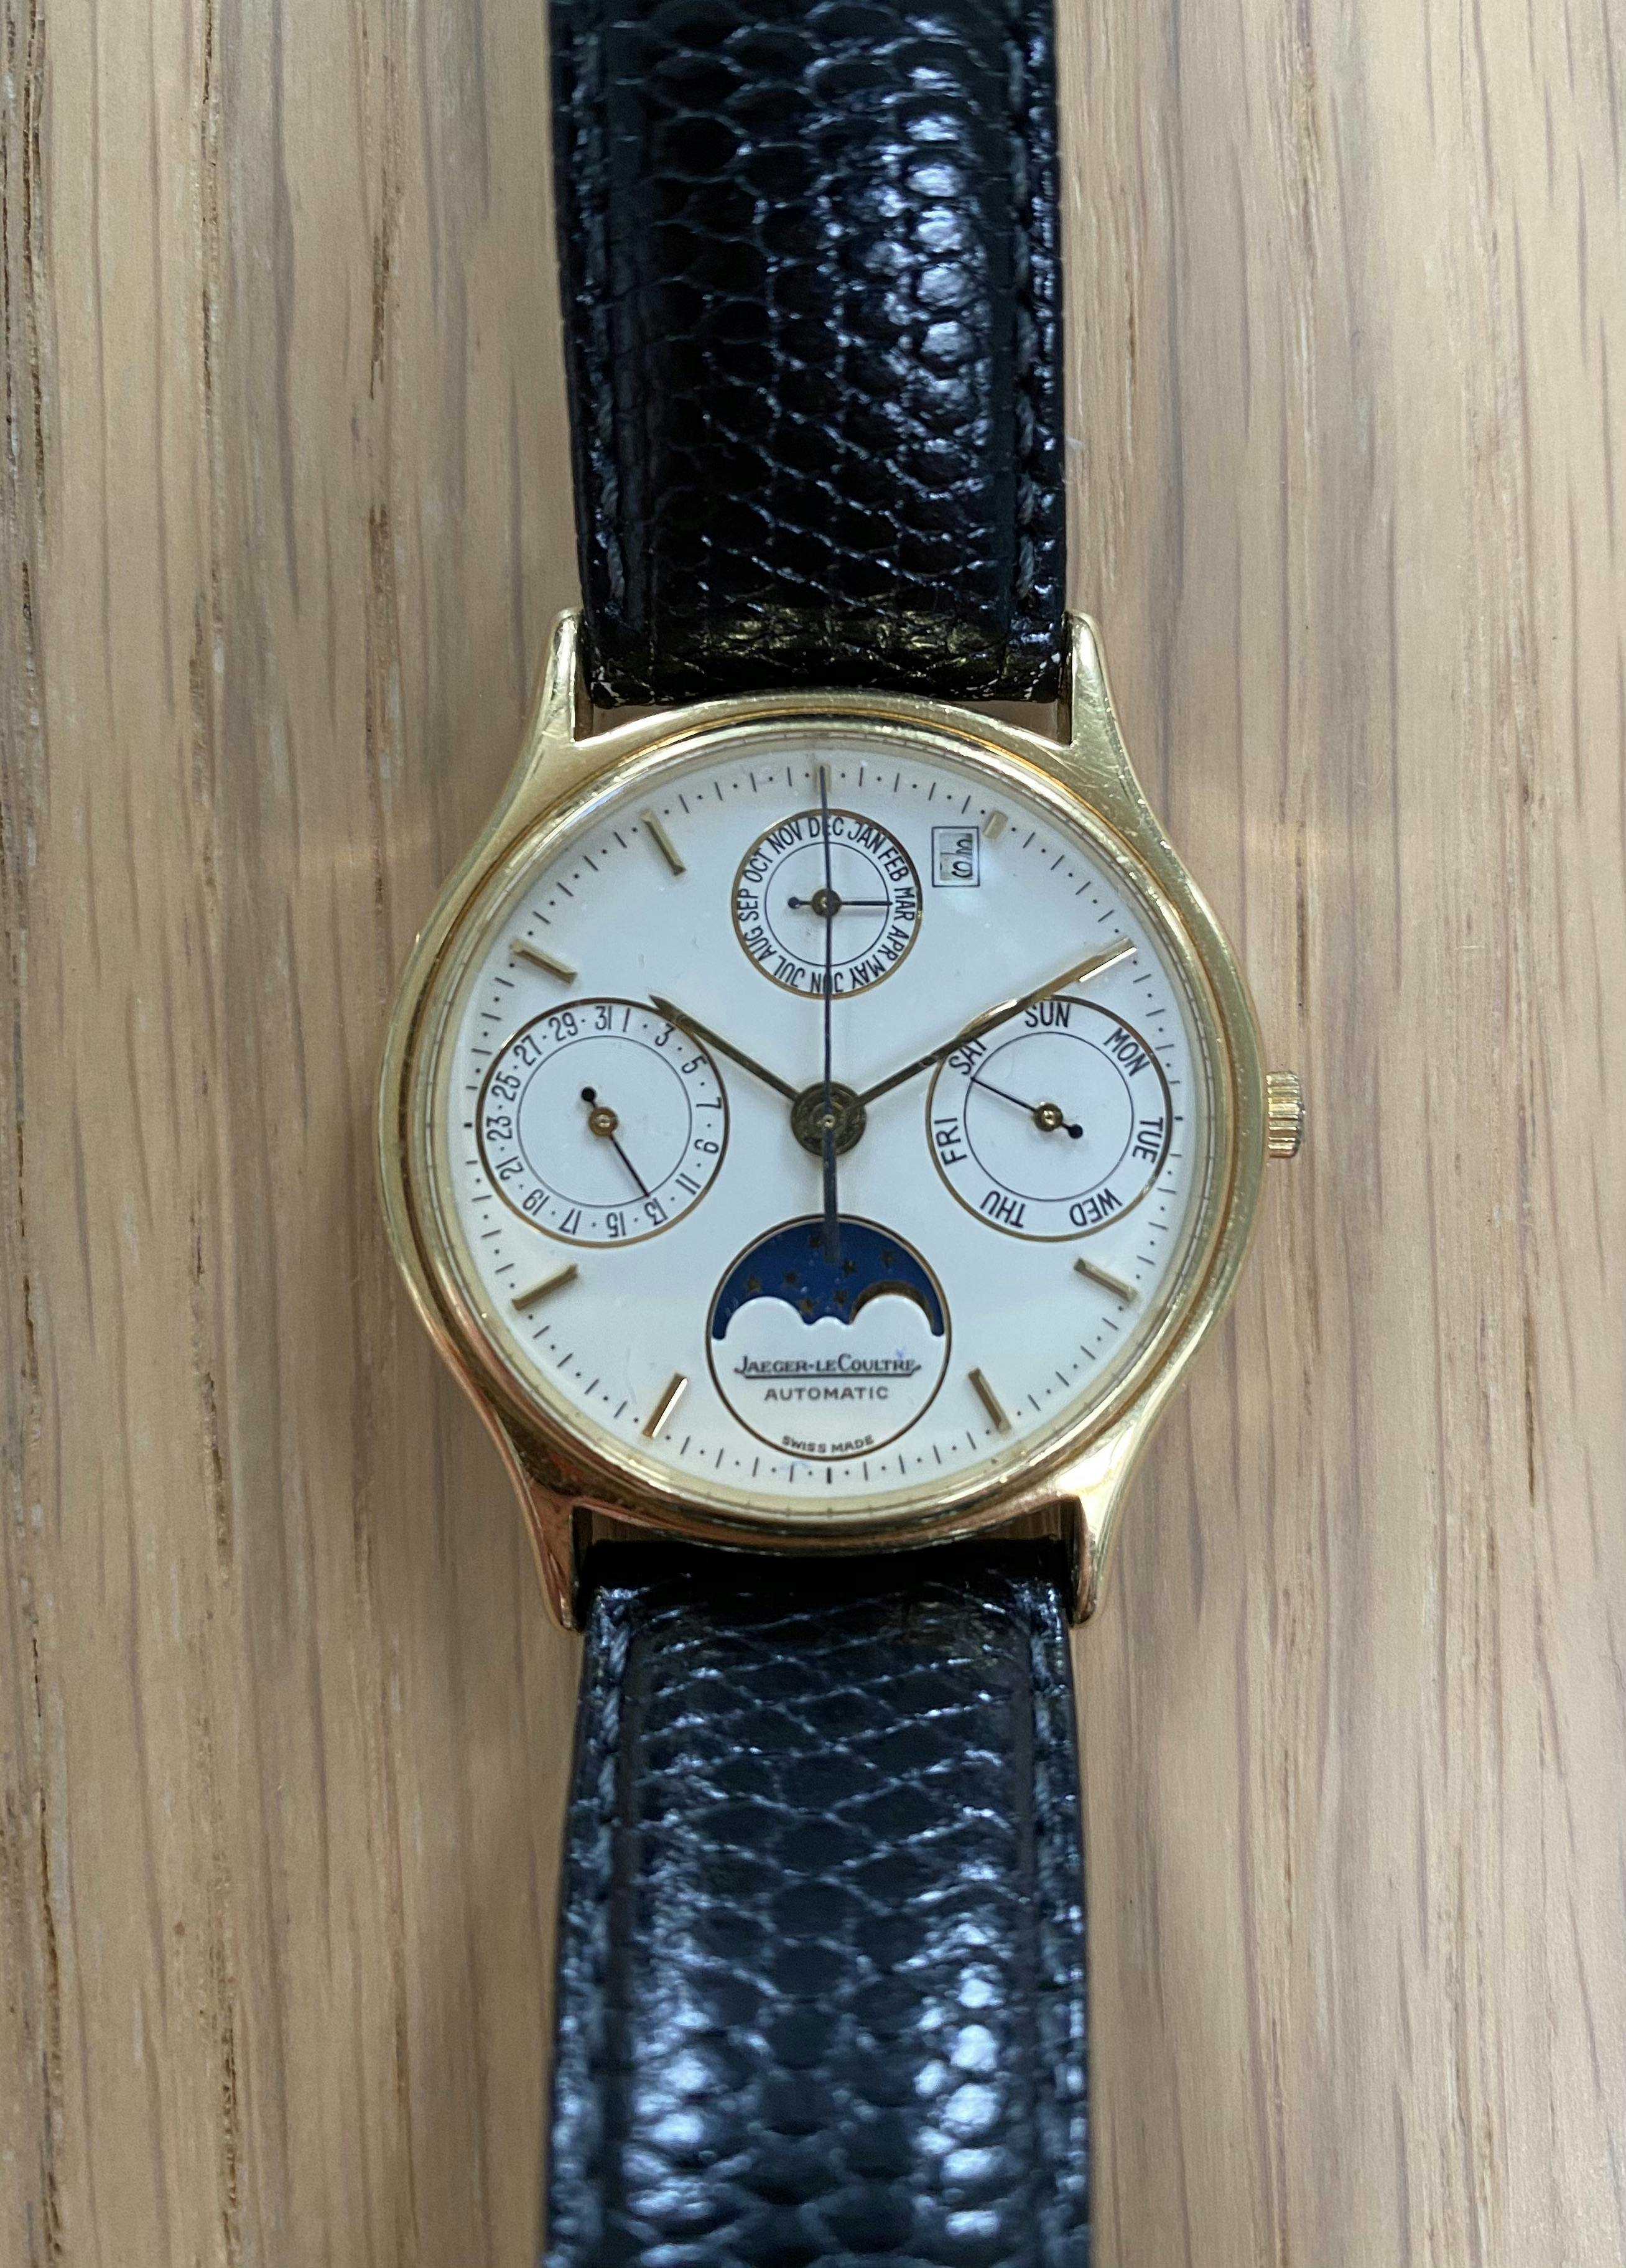 A Vintage Jaeger LeCoultre Perpetual Calendar with an Enamel Dial and Moonphase